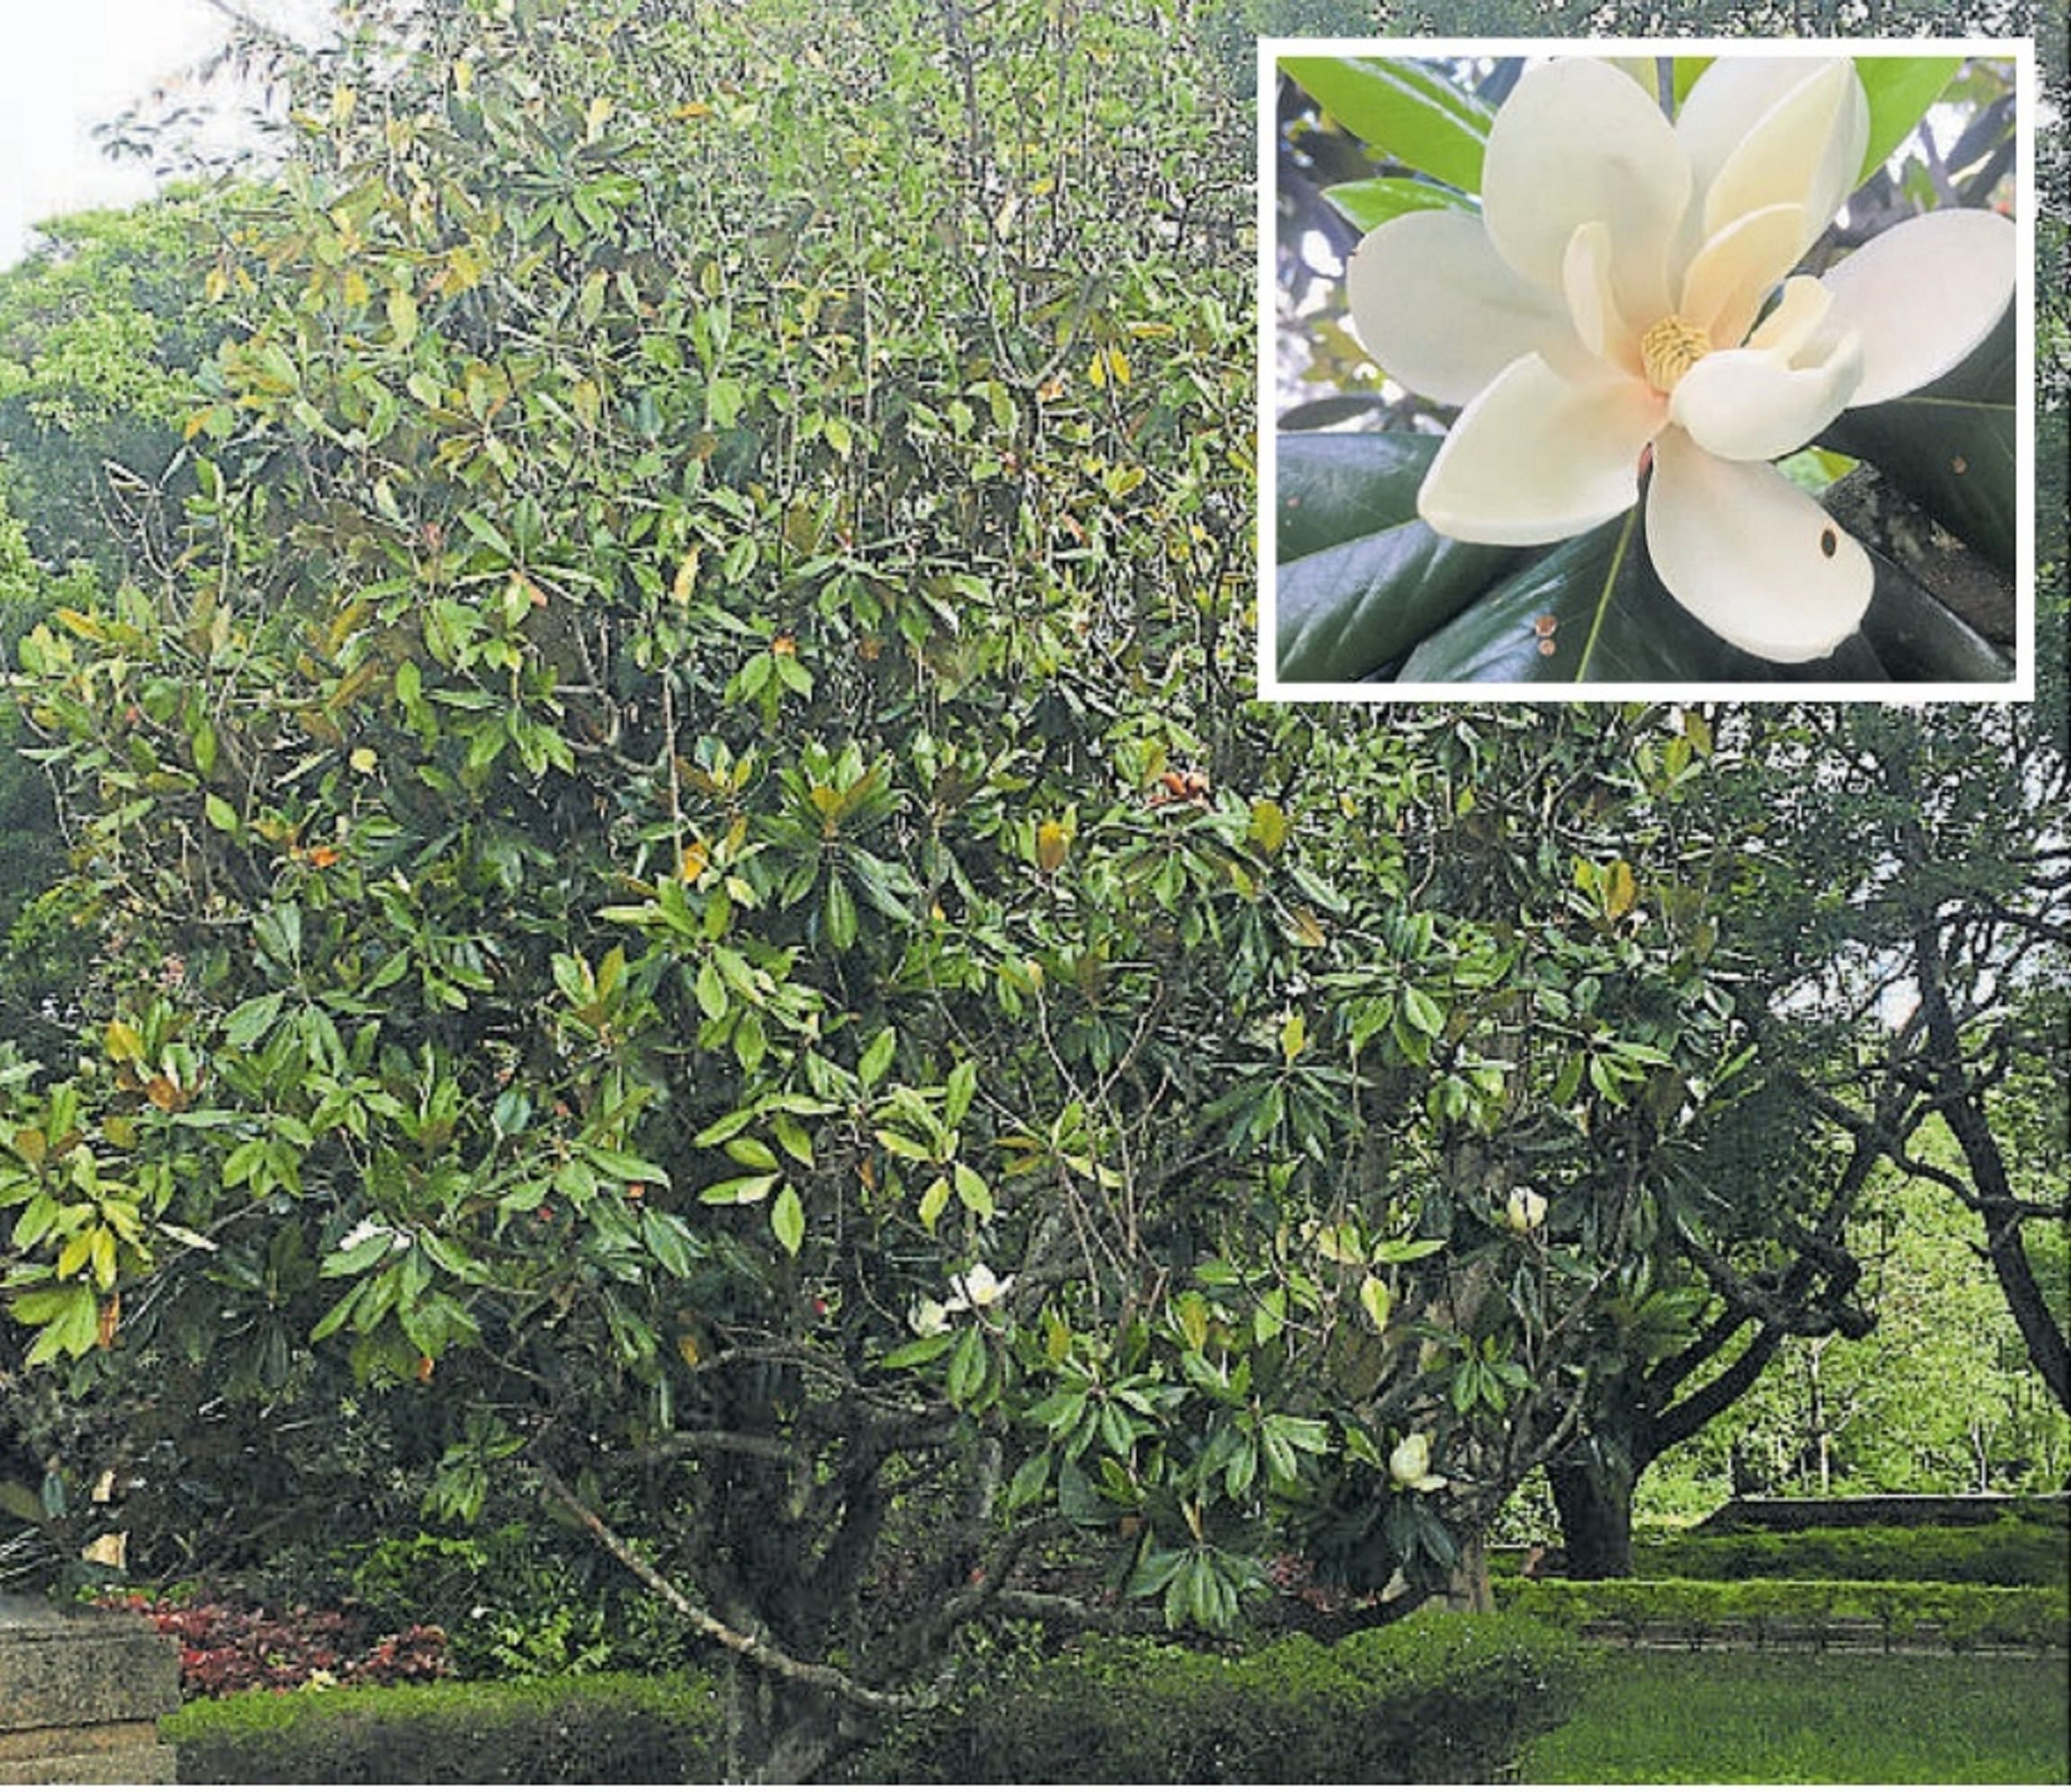 The Magnolia grandiflora tree, located on IISc campus, was planted by Queen Elizabeth on February 21, 1961. (Inset) A flower from the tree. Photo credit: Sharath Ahuja